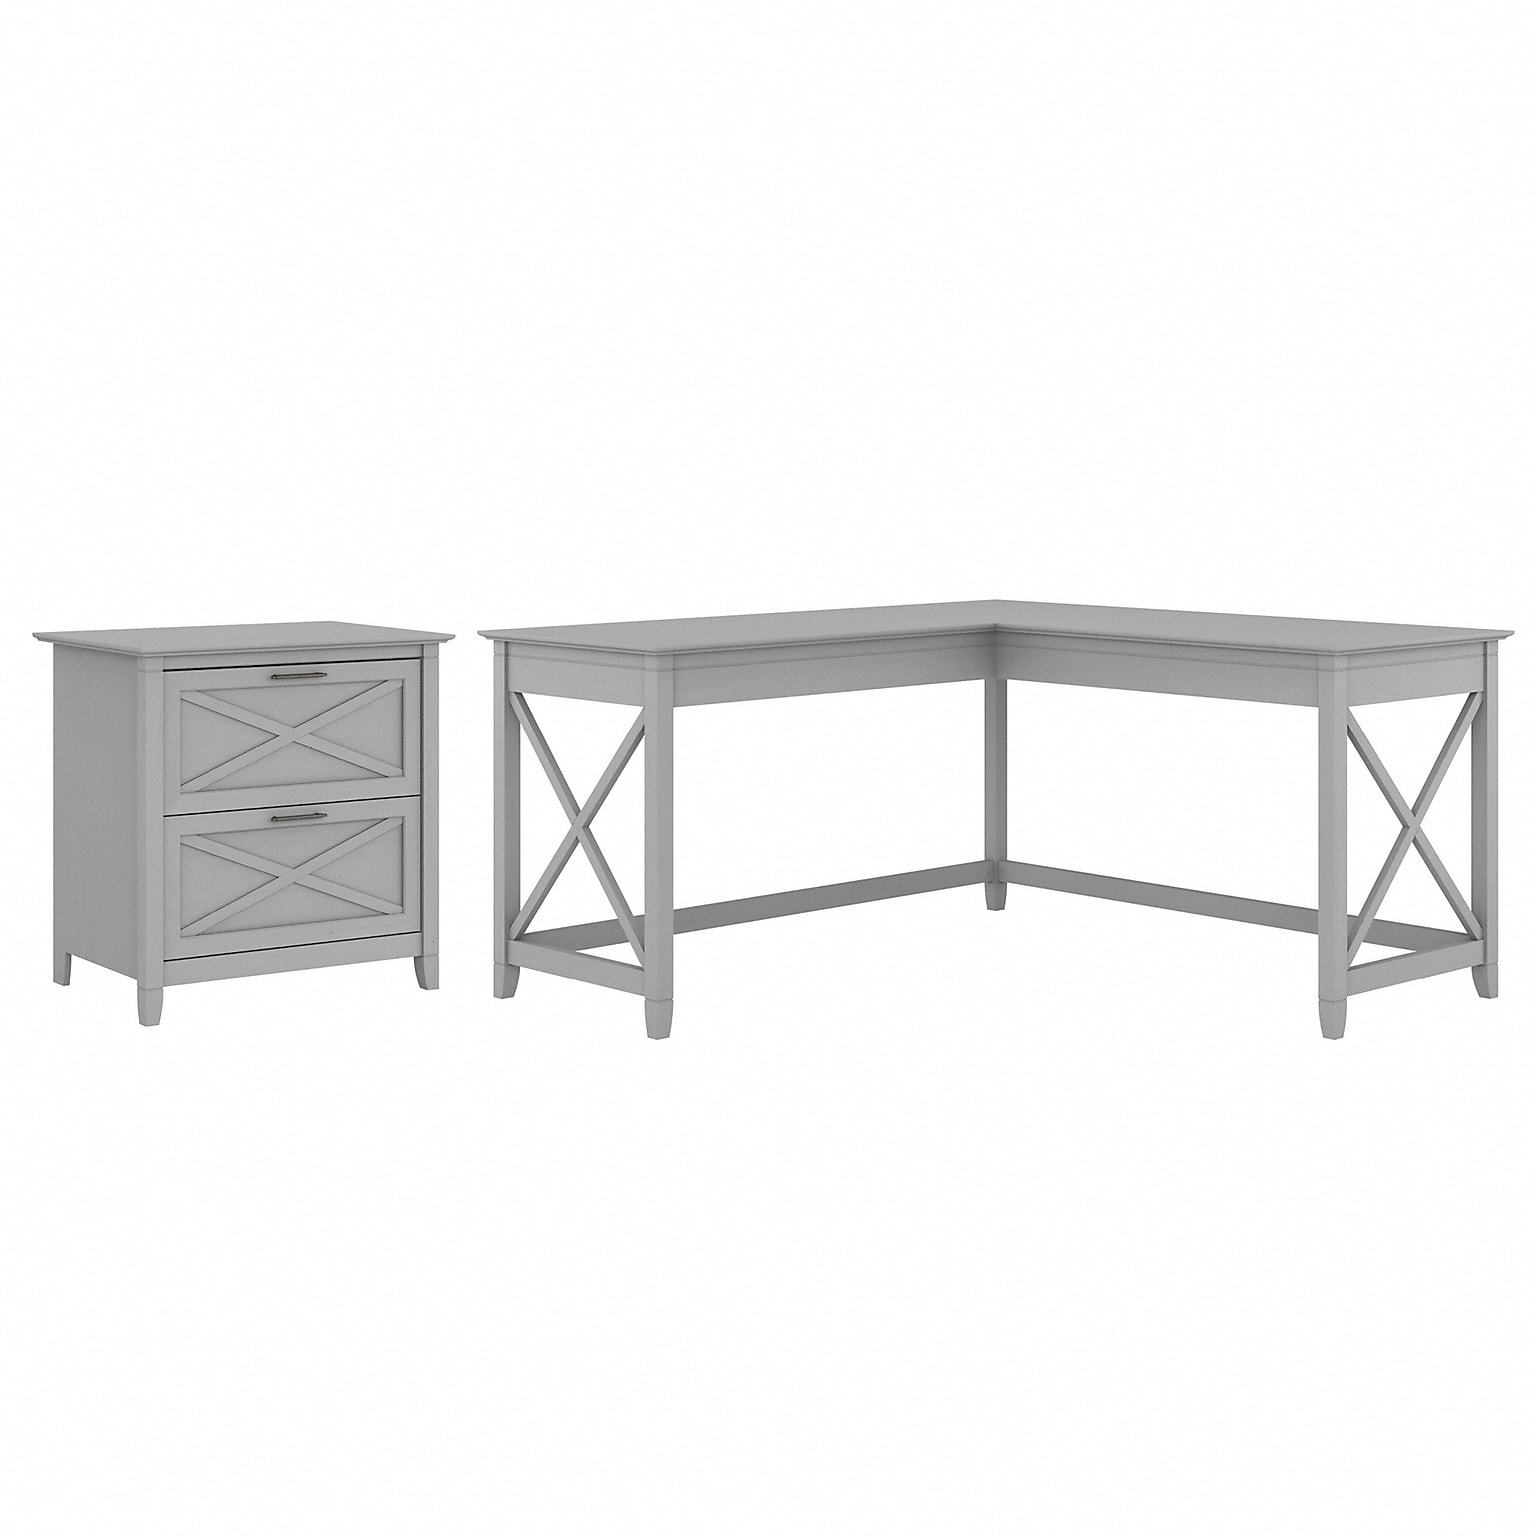 Bush Furniture Key West 60 L-Shaped Desk with Two-Drawer Lateral File Cabinet, Cape Cod Gray (KWS014CG)